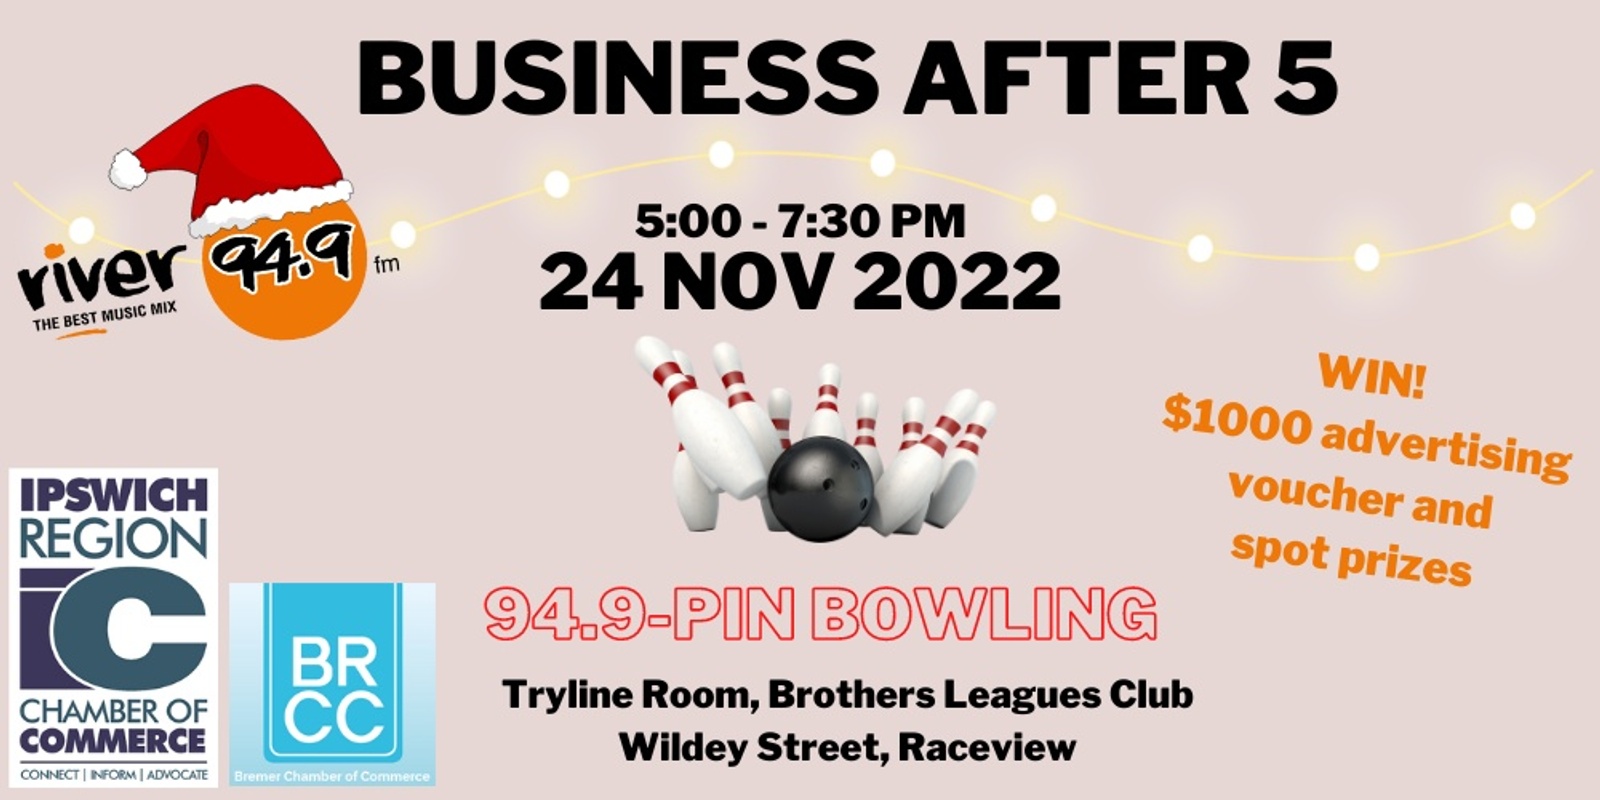 Banner image for Business After 5 - River 94.9 